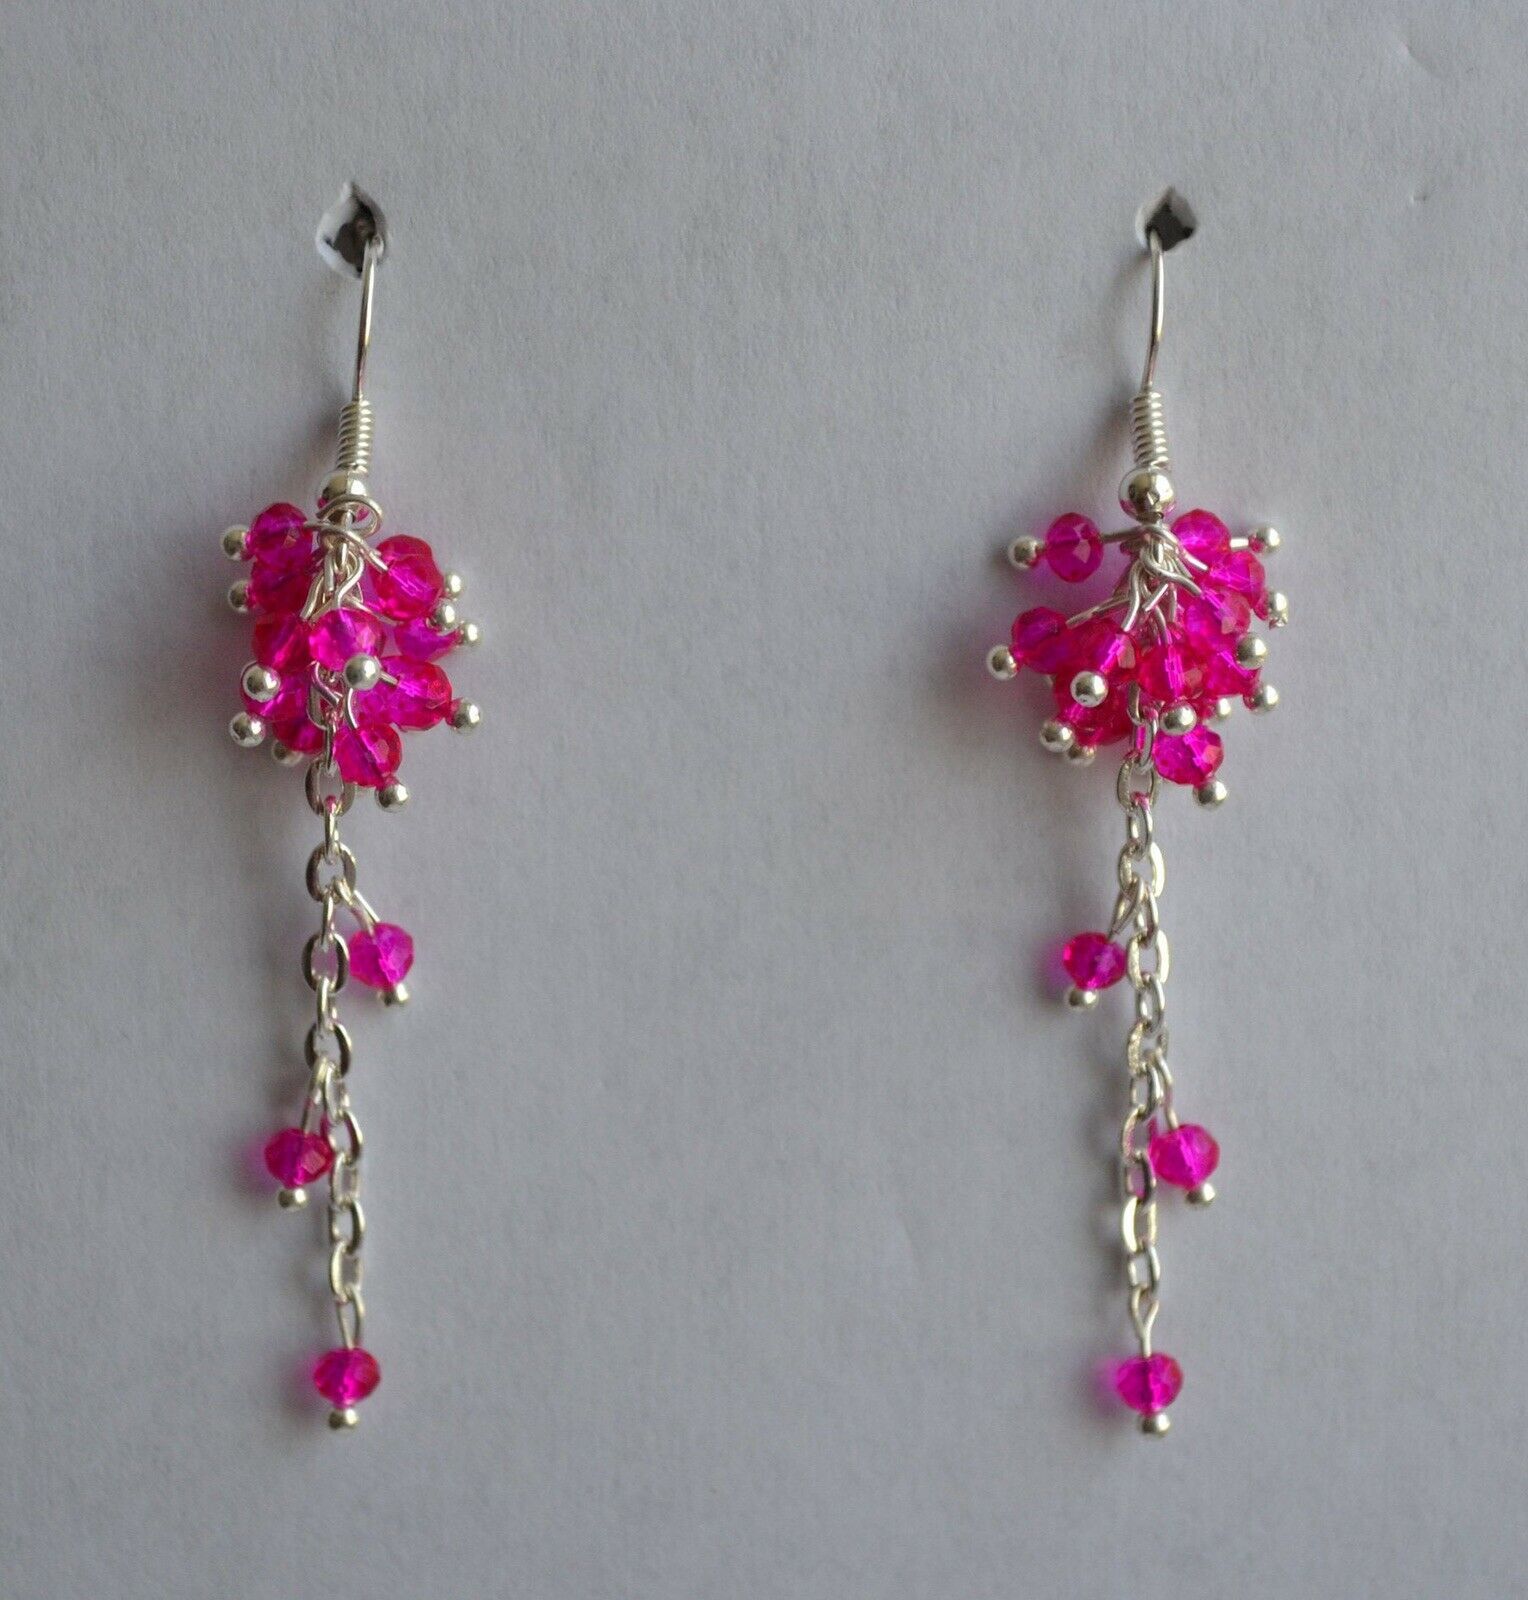 Primary image for Handmade Fuchsia Glass Bead Silver Plated Chain Cluster Earring